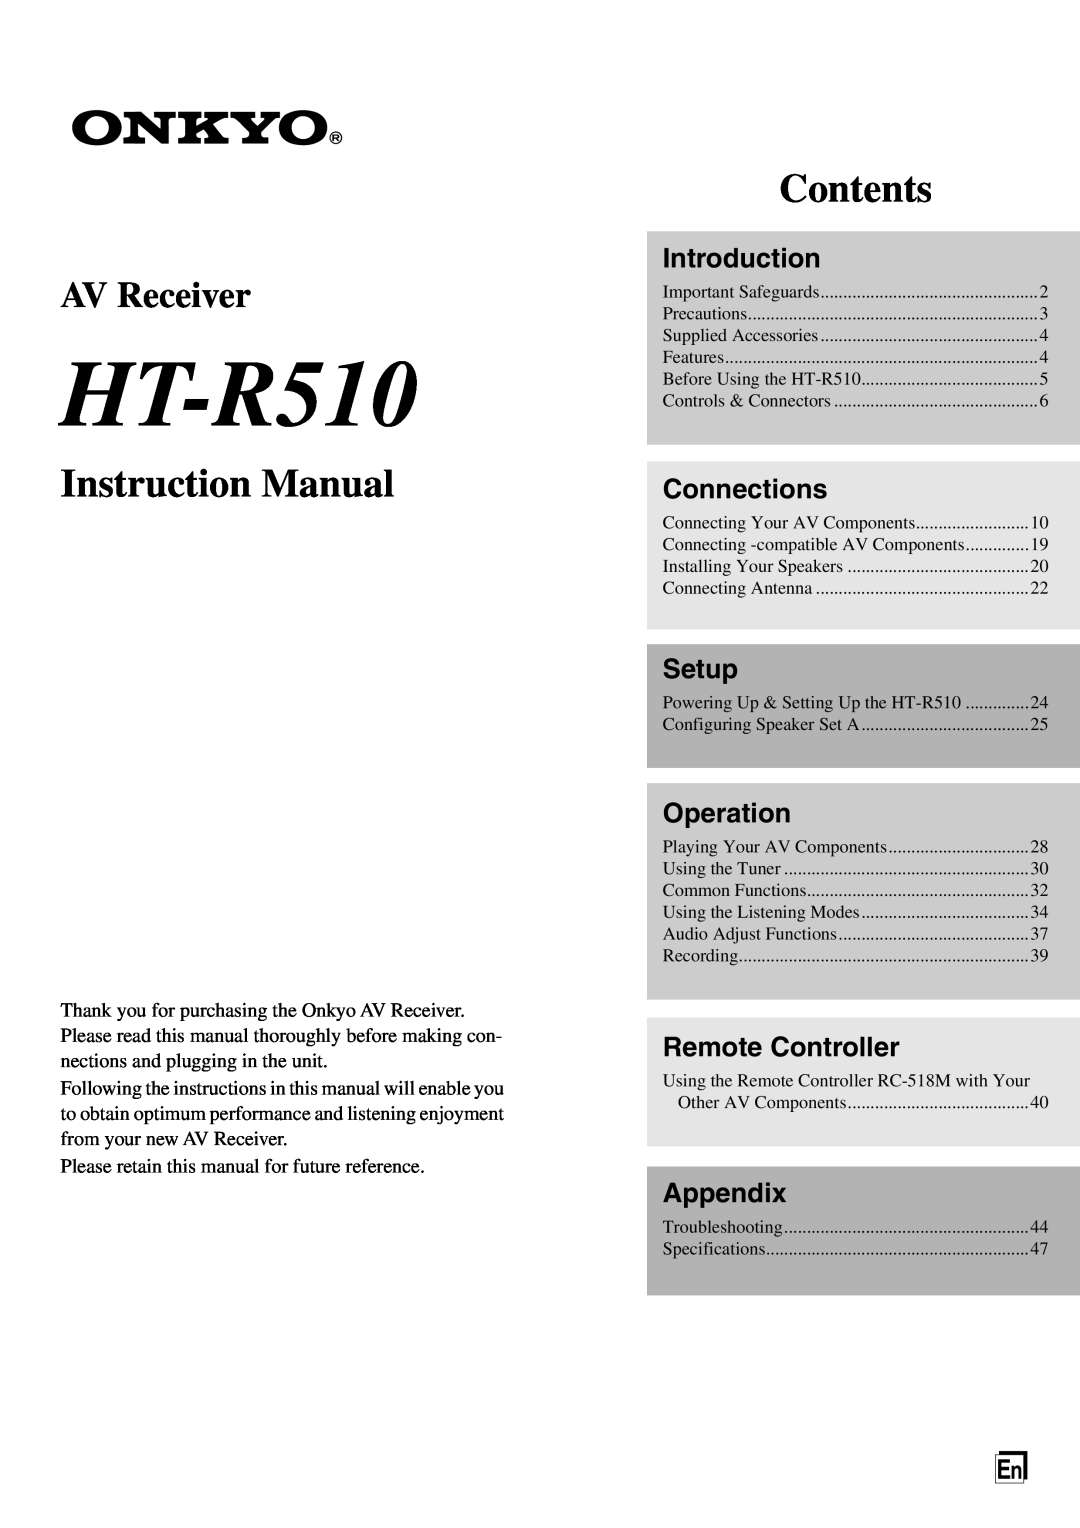 Onkyo HT-R510 instruction manual Introduction, Connections, Setup, Operation, Remote Controller, Appendix, Contents 